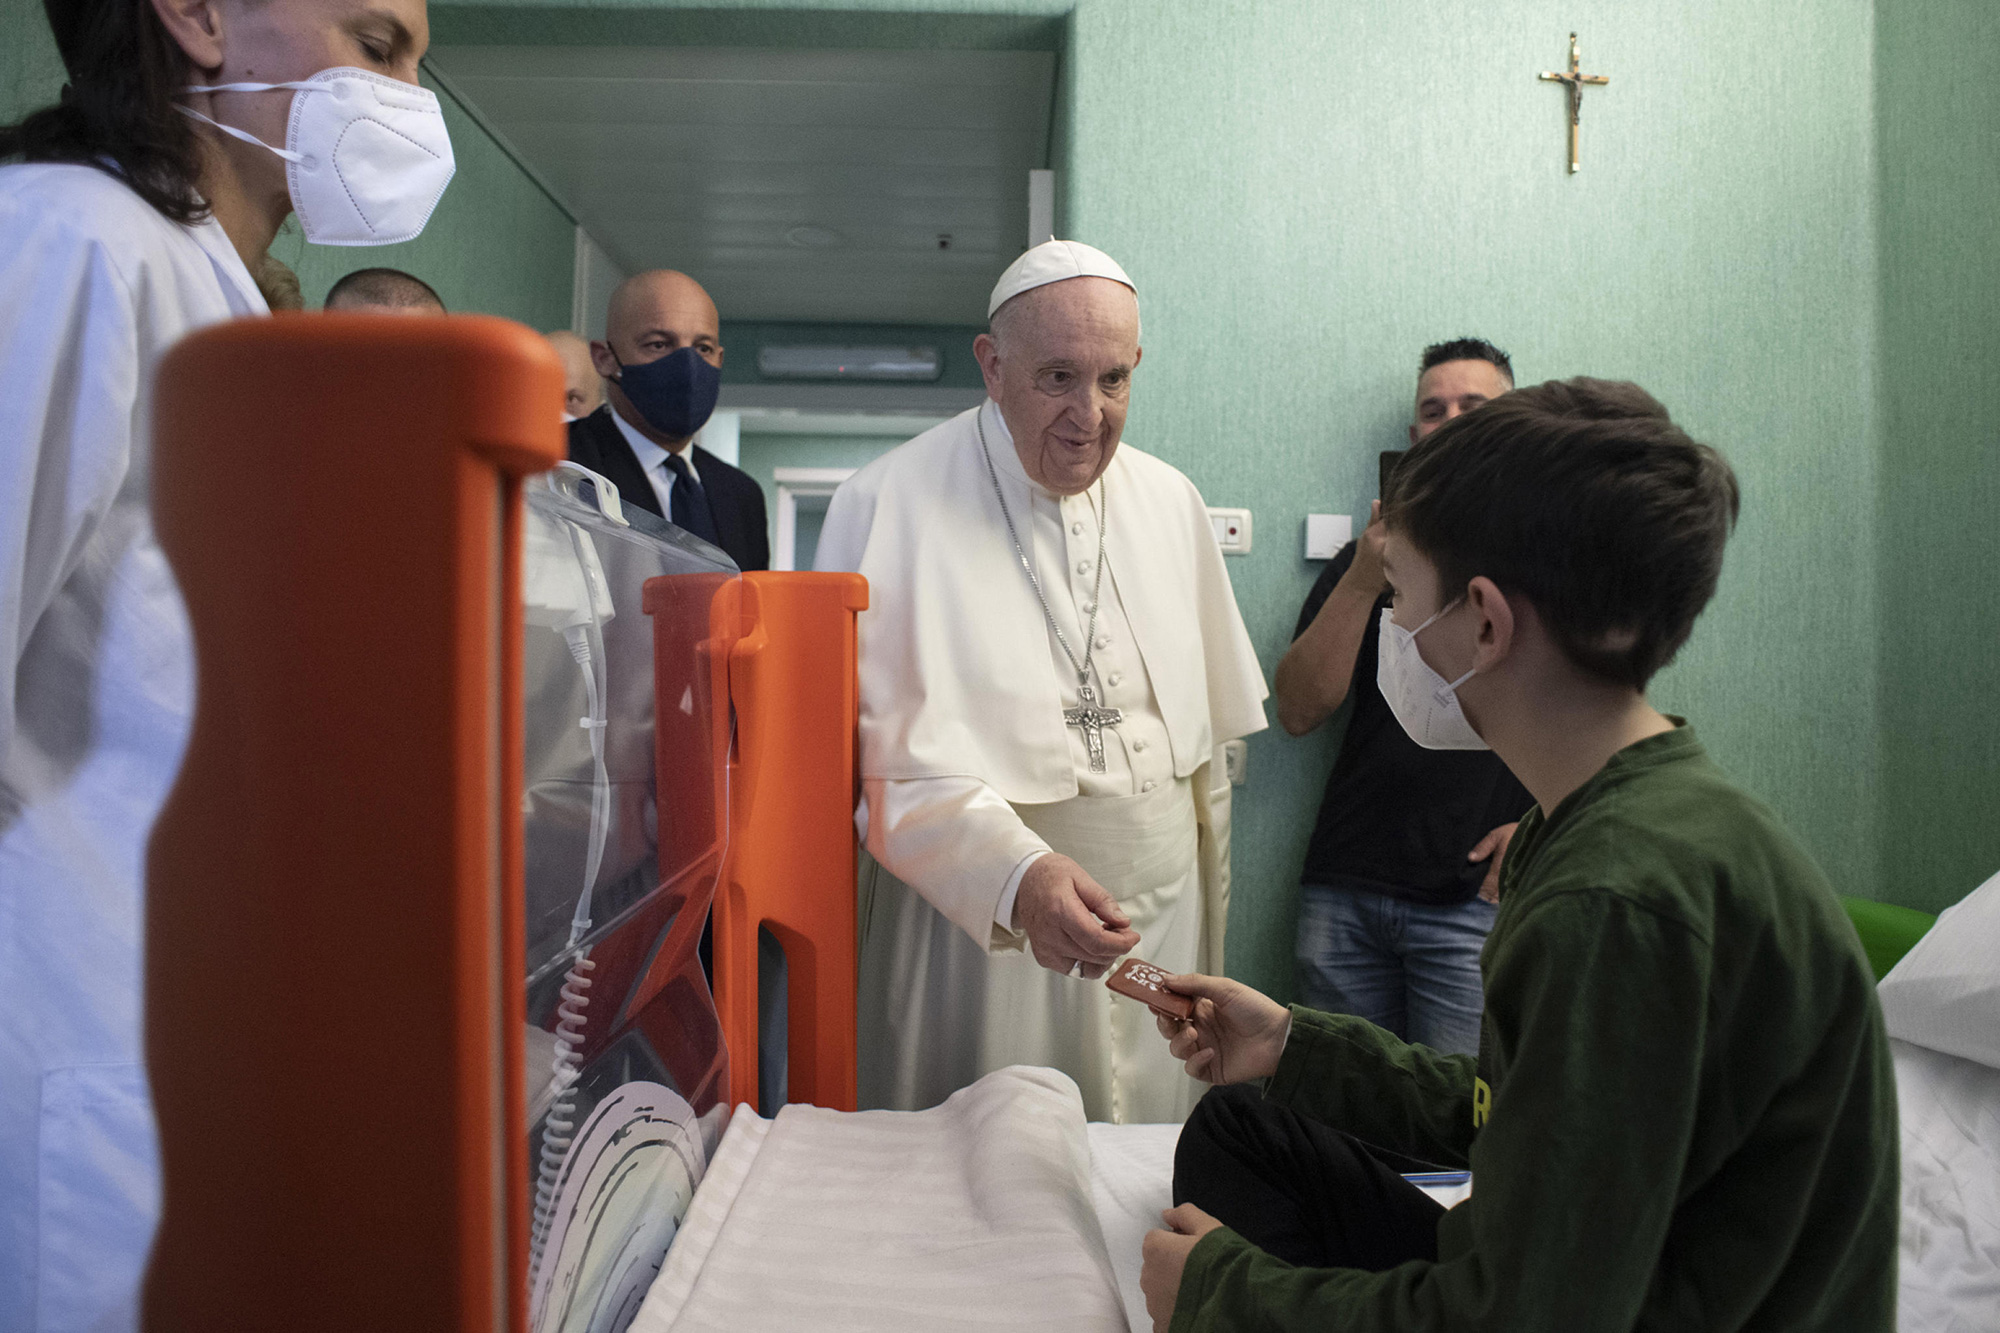 Pope Francis visits with hospitalized children who arrived from Ukraine at the Bambino Gesù Pediatric Hospital in Rome, Italy, on Saturday, March 19.